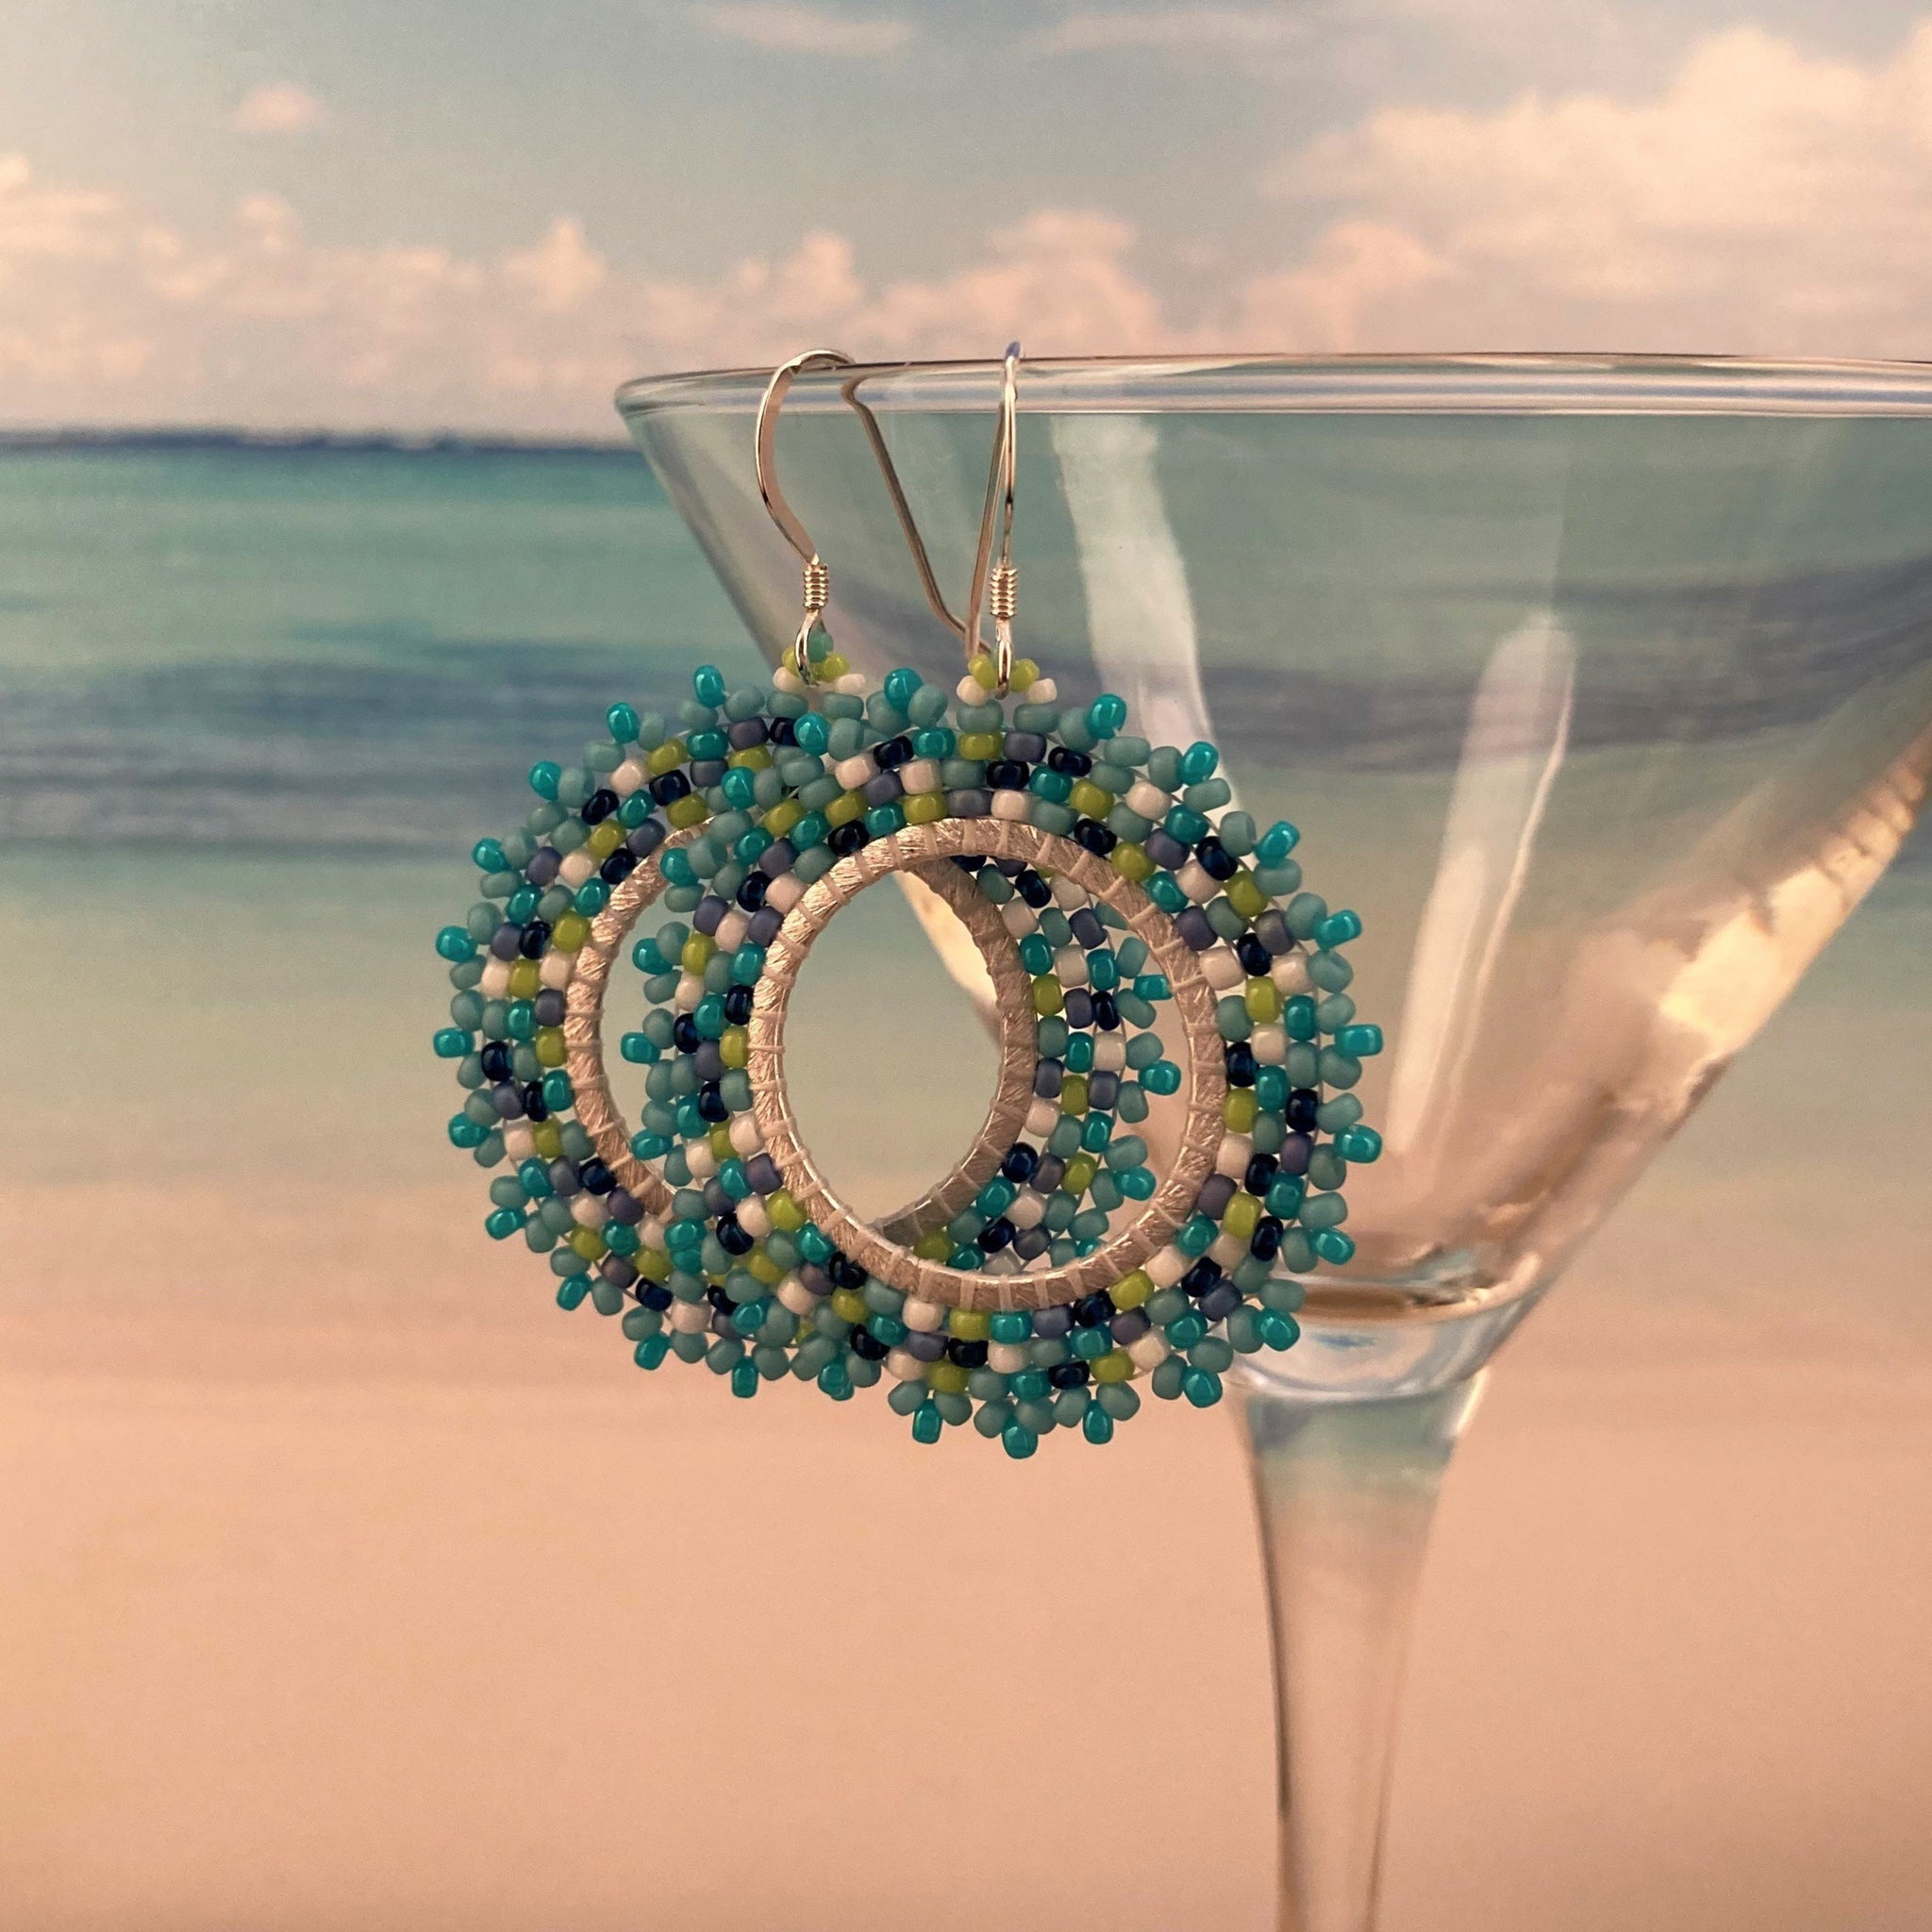 Petite Beaded Hoops in Turquoise Navy Green and White